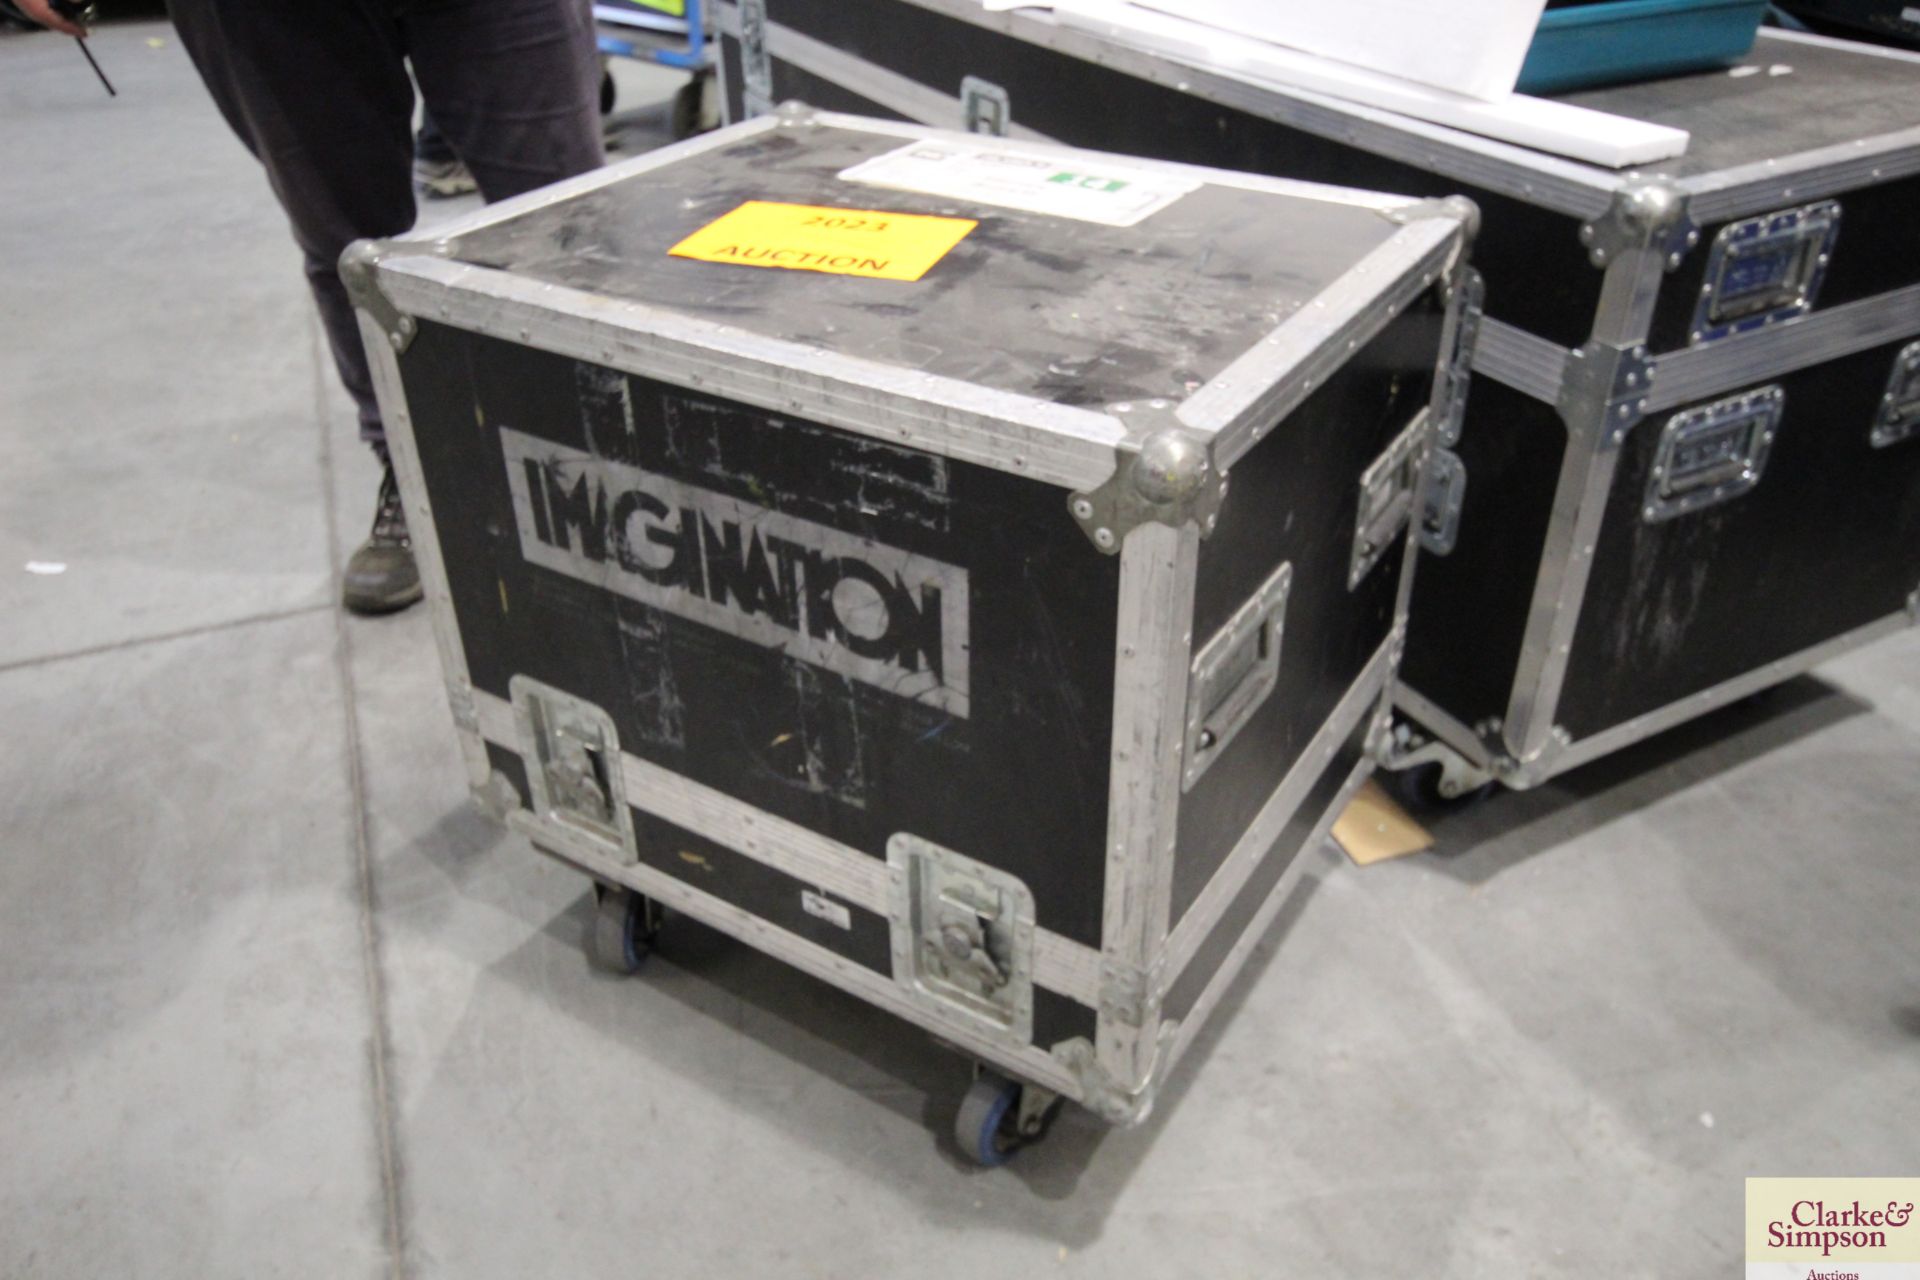 Wheeled flight case measuring approx. 55cm x 70.5cm x 55cm, containing two Brother HL2340DW